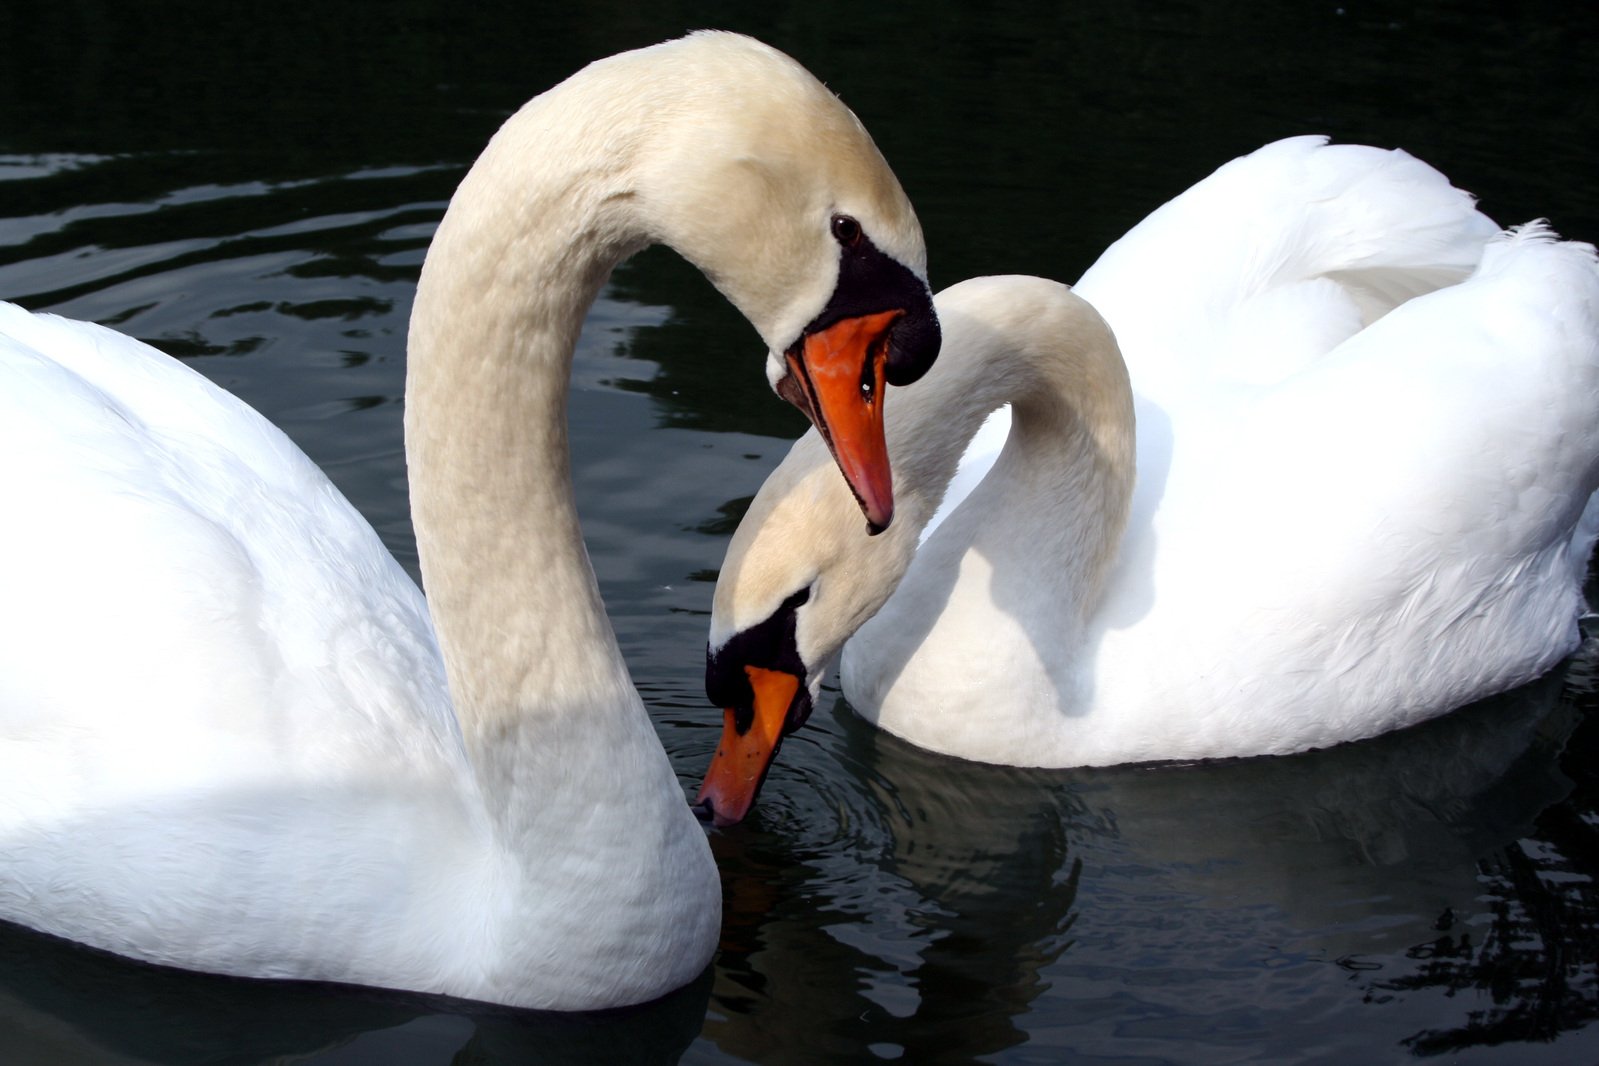 two white swans with orange beaks swim in the water